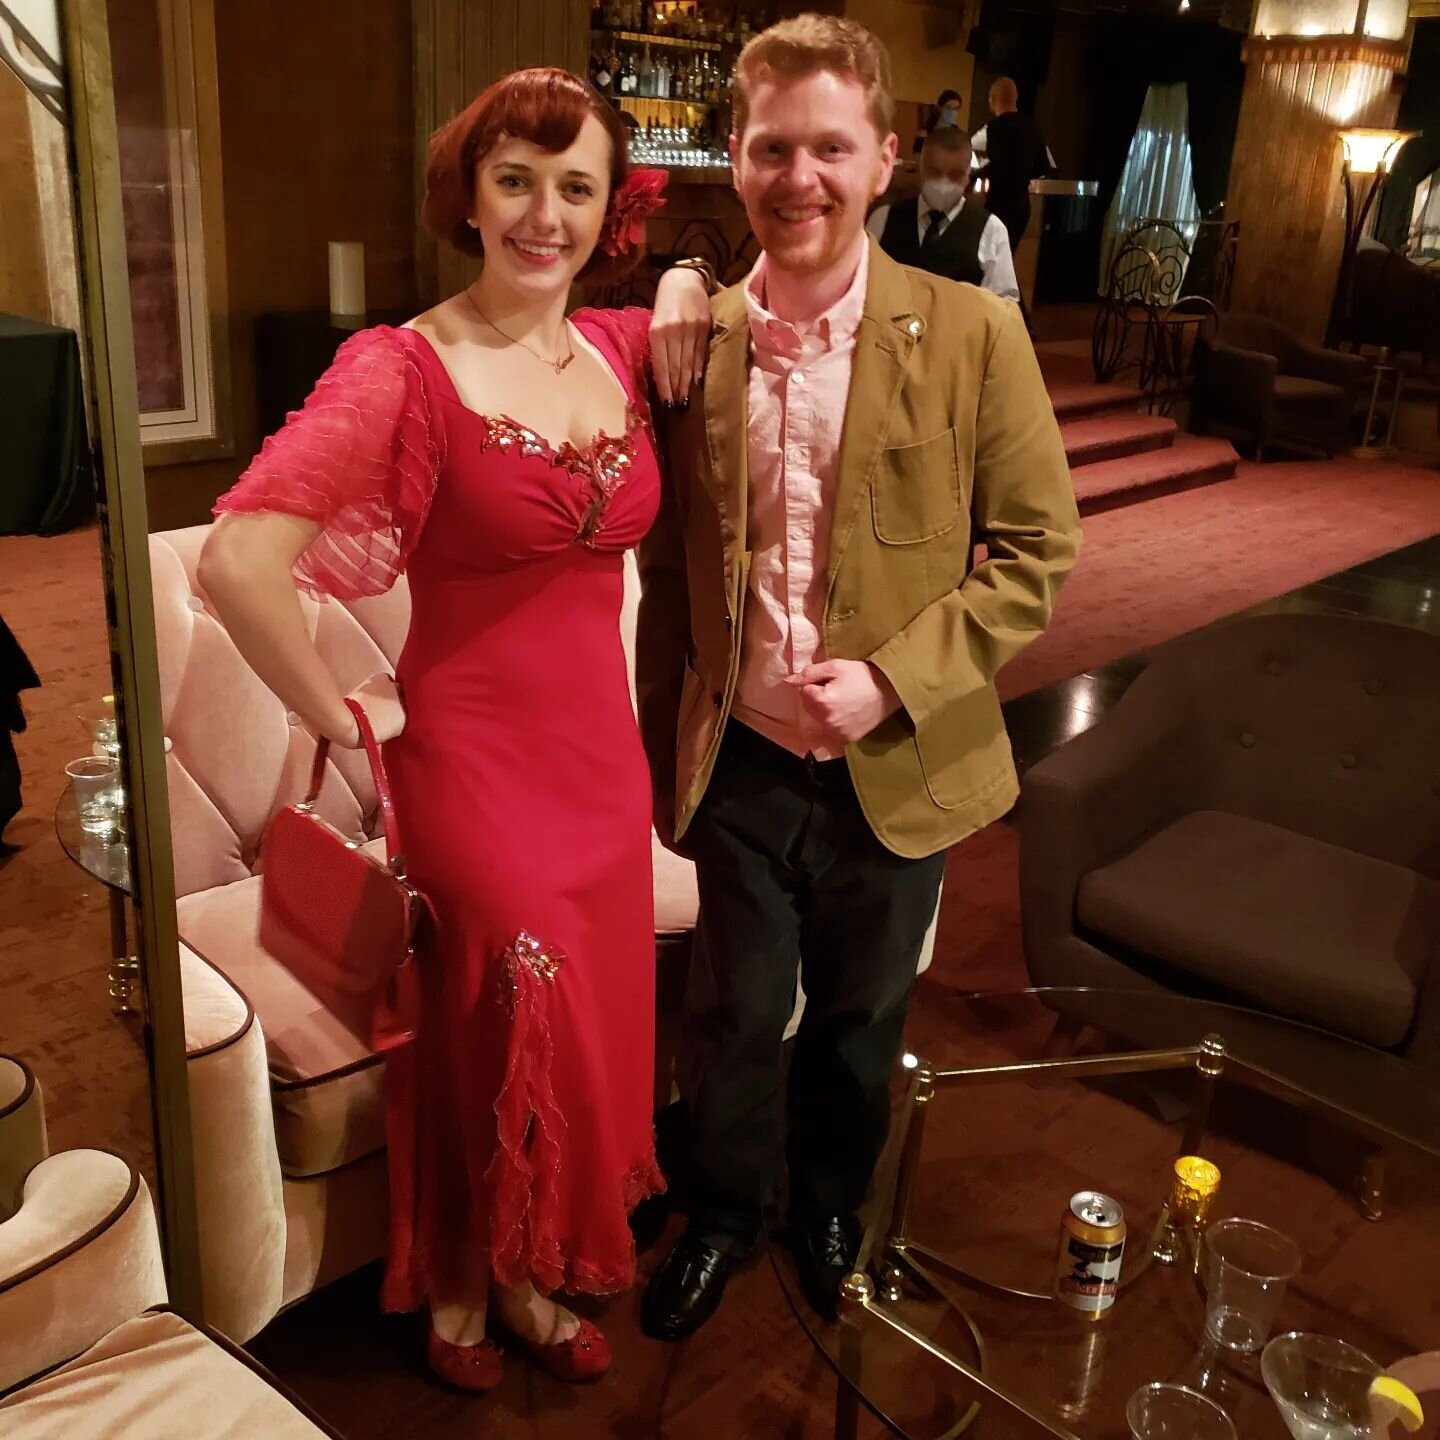 Last night while being transported back in time to a historic 1920s &quot;Gatsby Style&quot; Art-Deco Ballroom. I meet the glamorous magician &quot;The Magical Katrina.&quot; 

On top of all this &quot;The Hukilu Hotshots&quot; serenaded the guests w